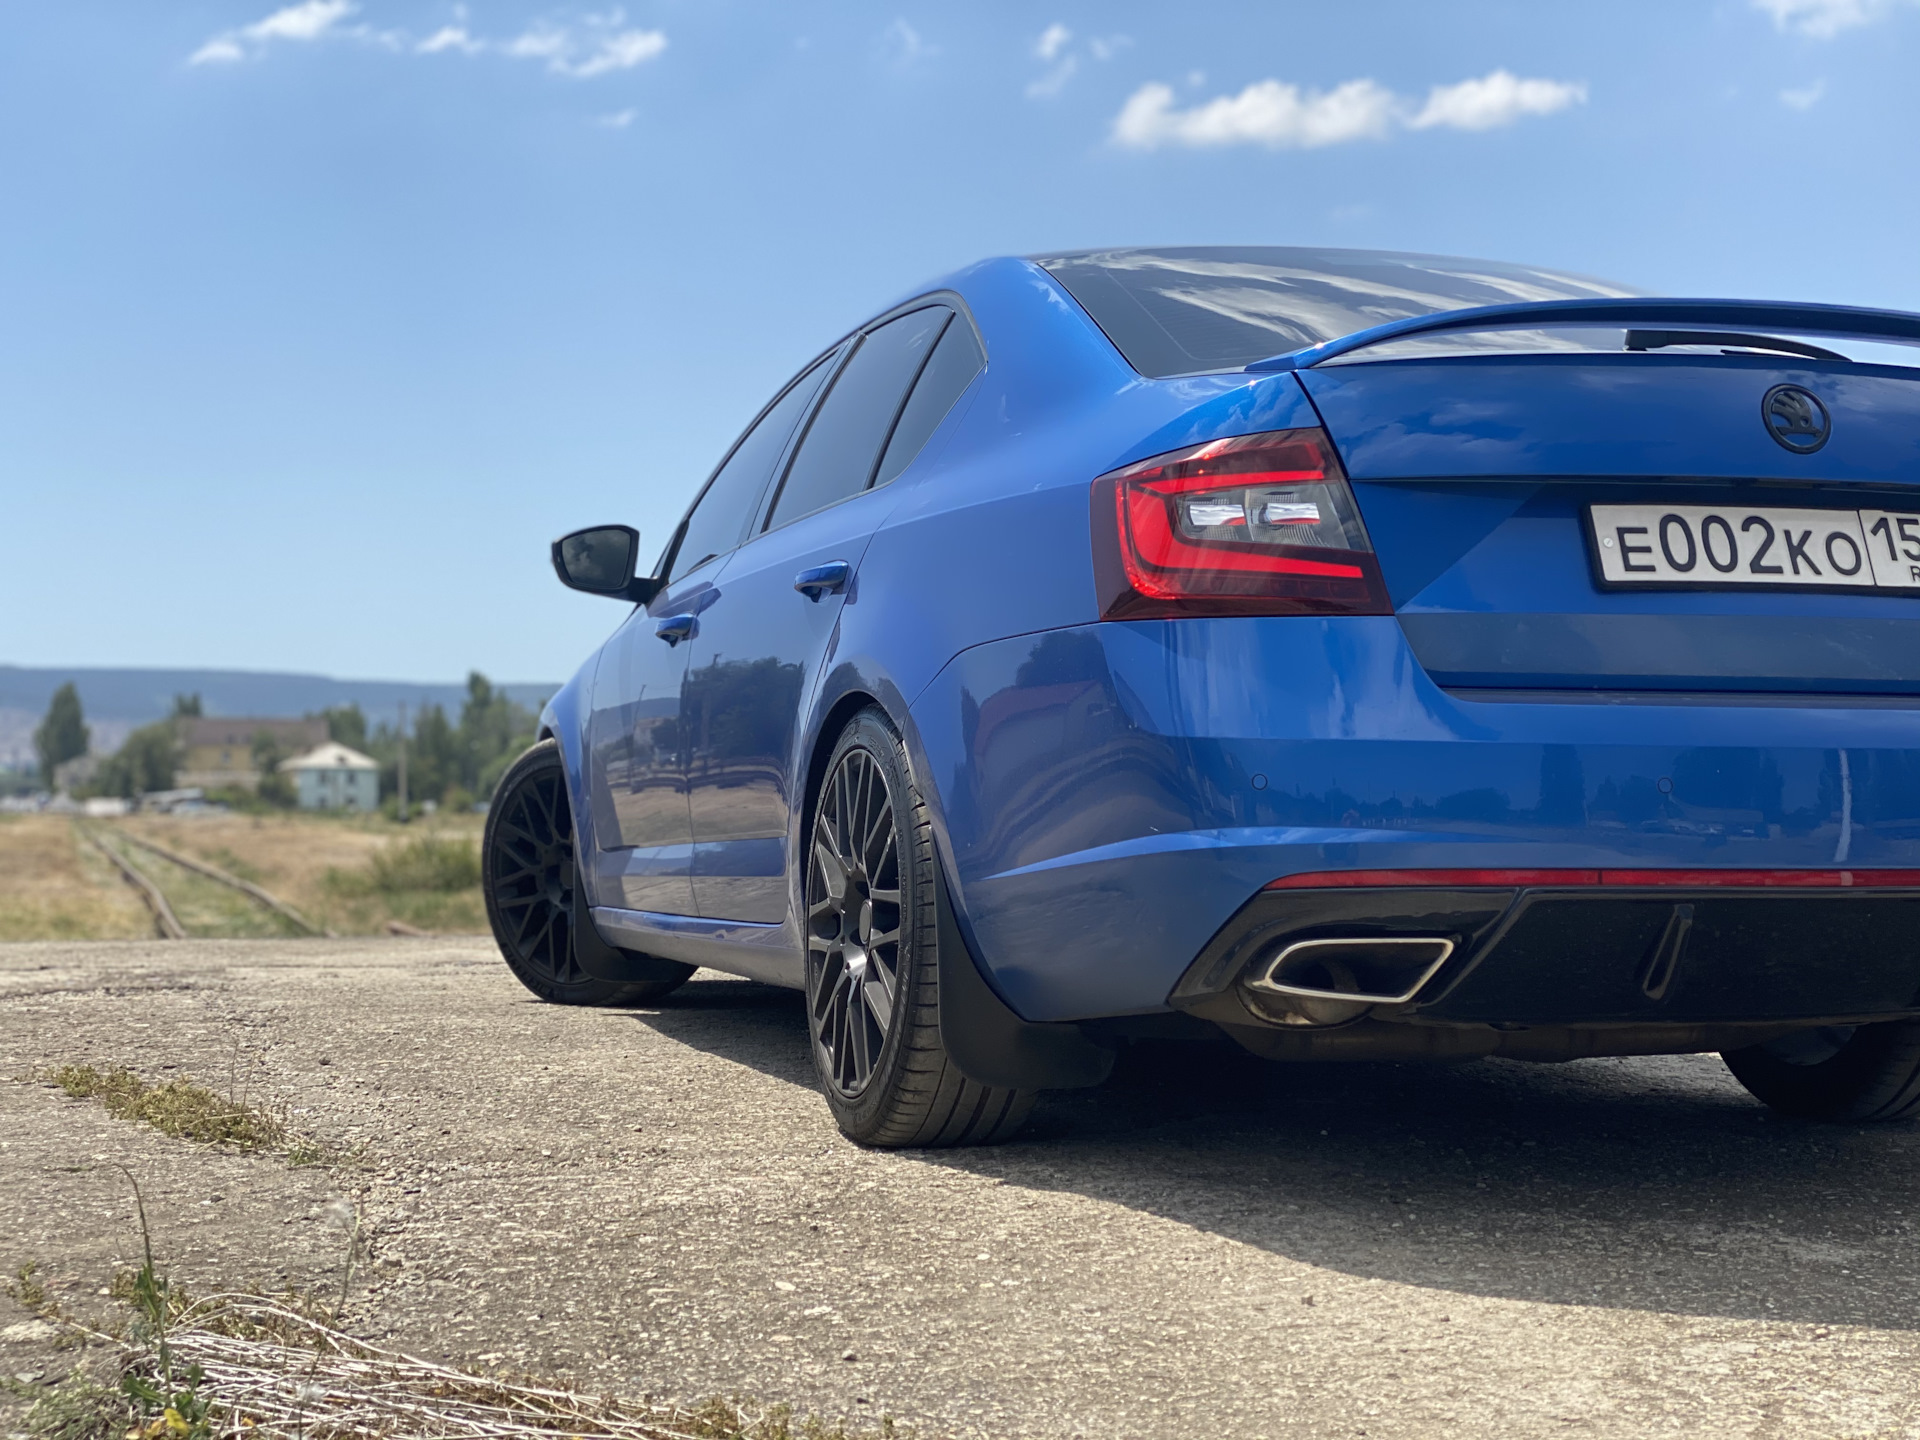 Skoda octavia rs 2021. Skoda Octavia RS 2022. Skoda Octavia RS 2019.